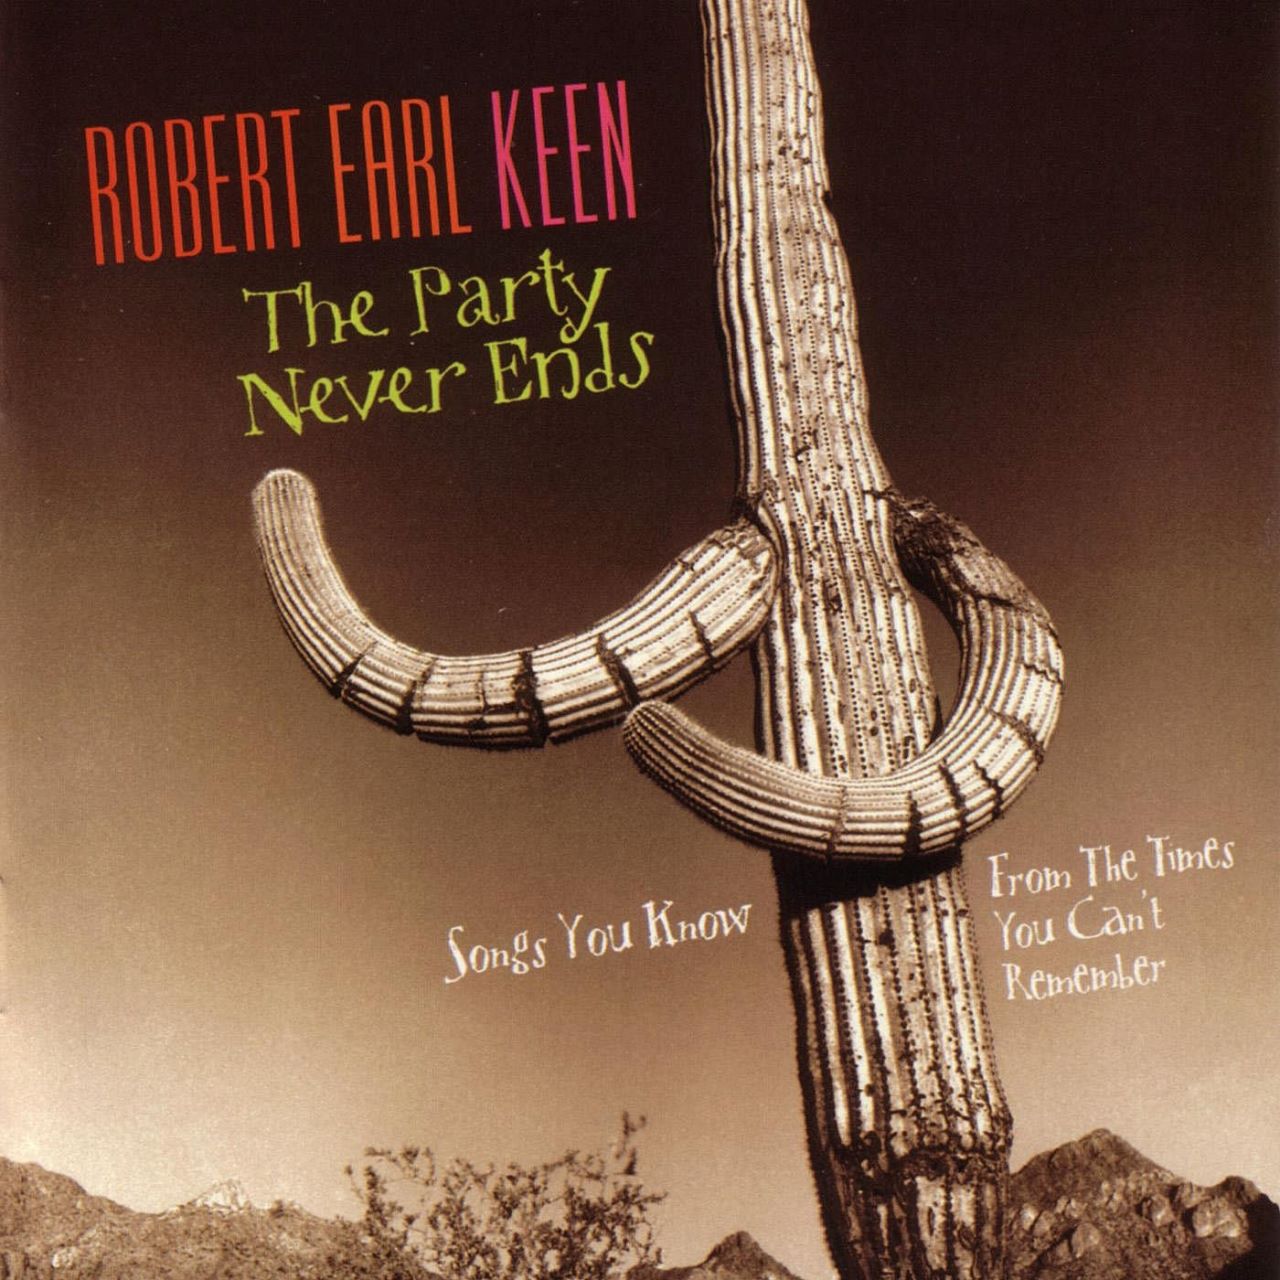 Robert Earl Keen - The Party Never Ends cover album